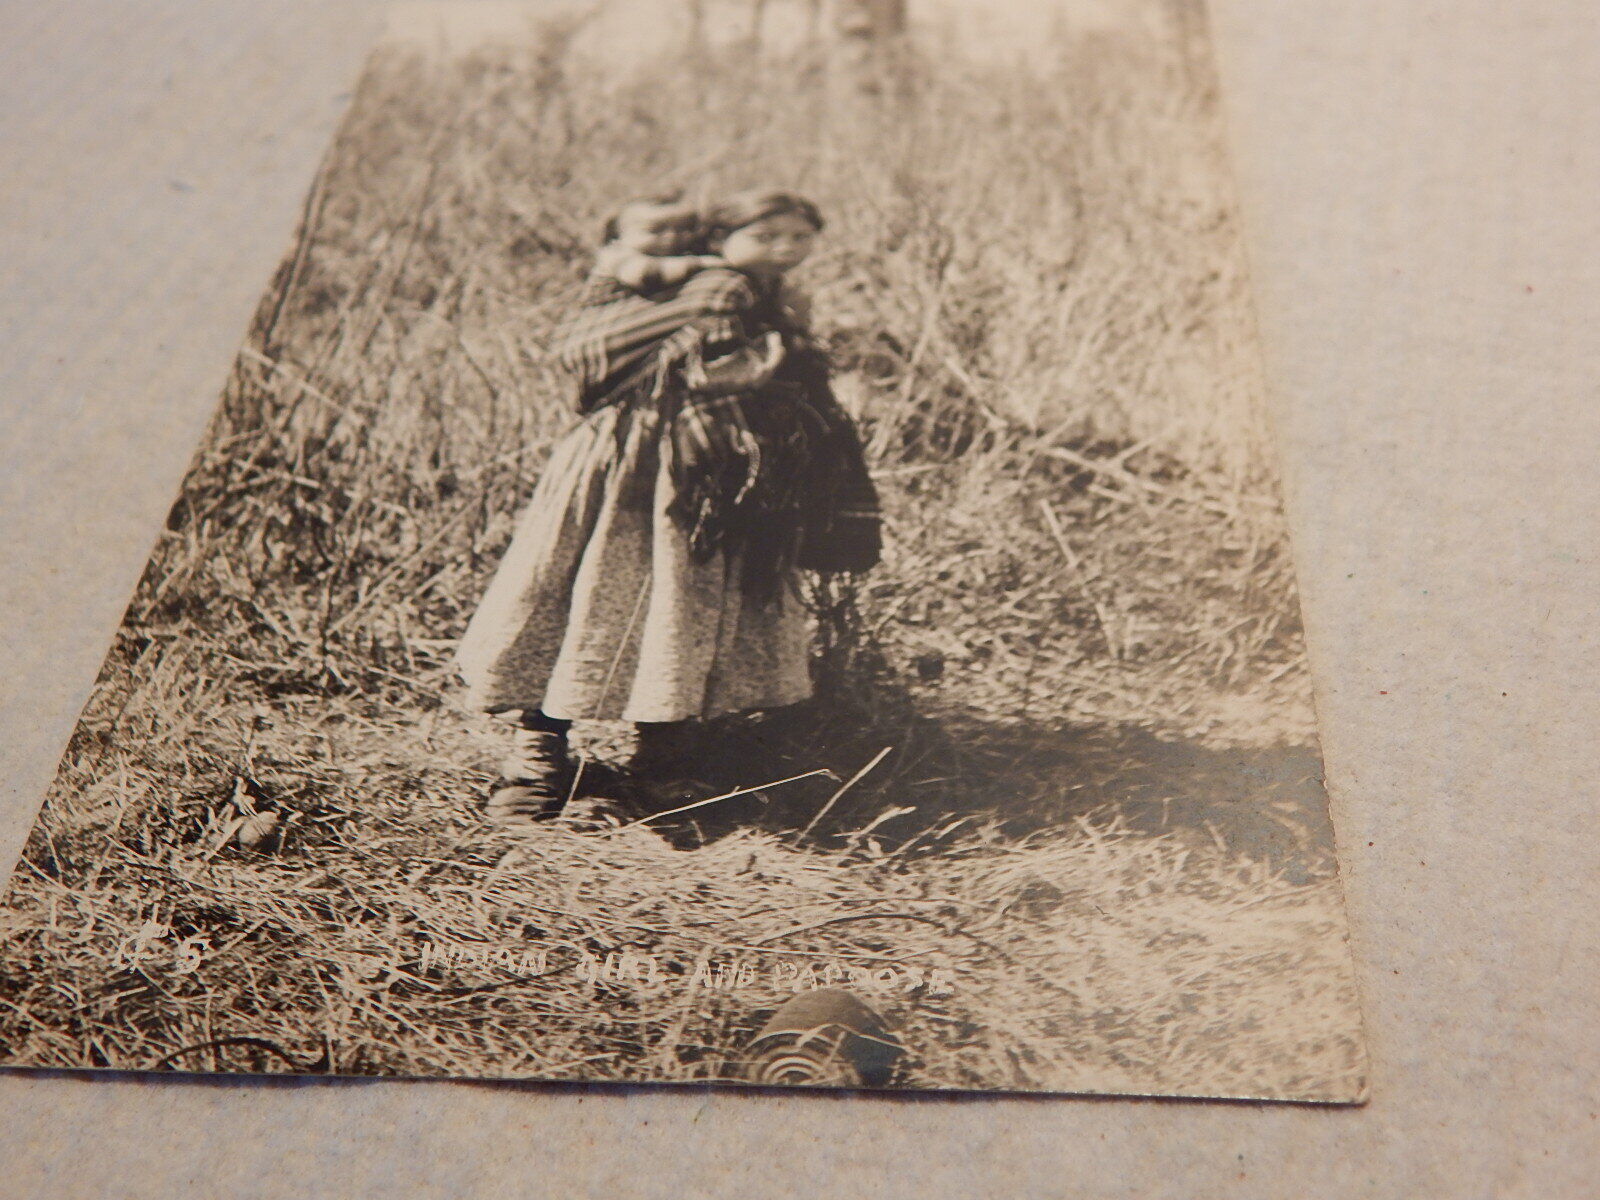 VTG 1920S 30S RPPC REAL PHOTO POSTCARD SMALL INDIAN GIRL WITH PAPOOSE NOT HAPPY